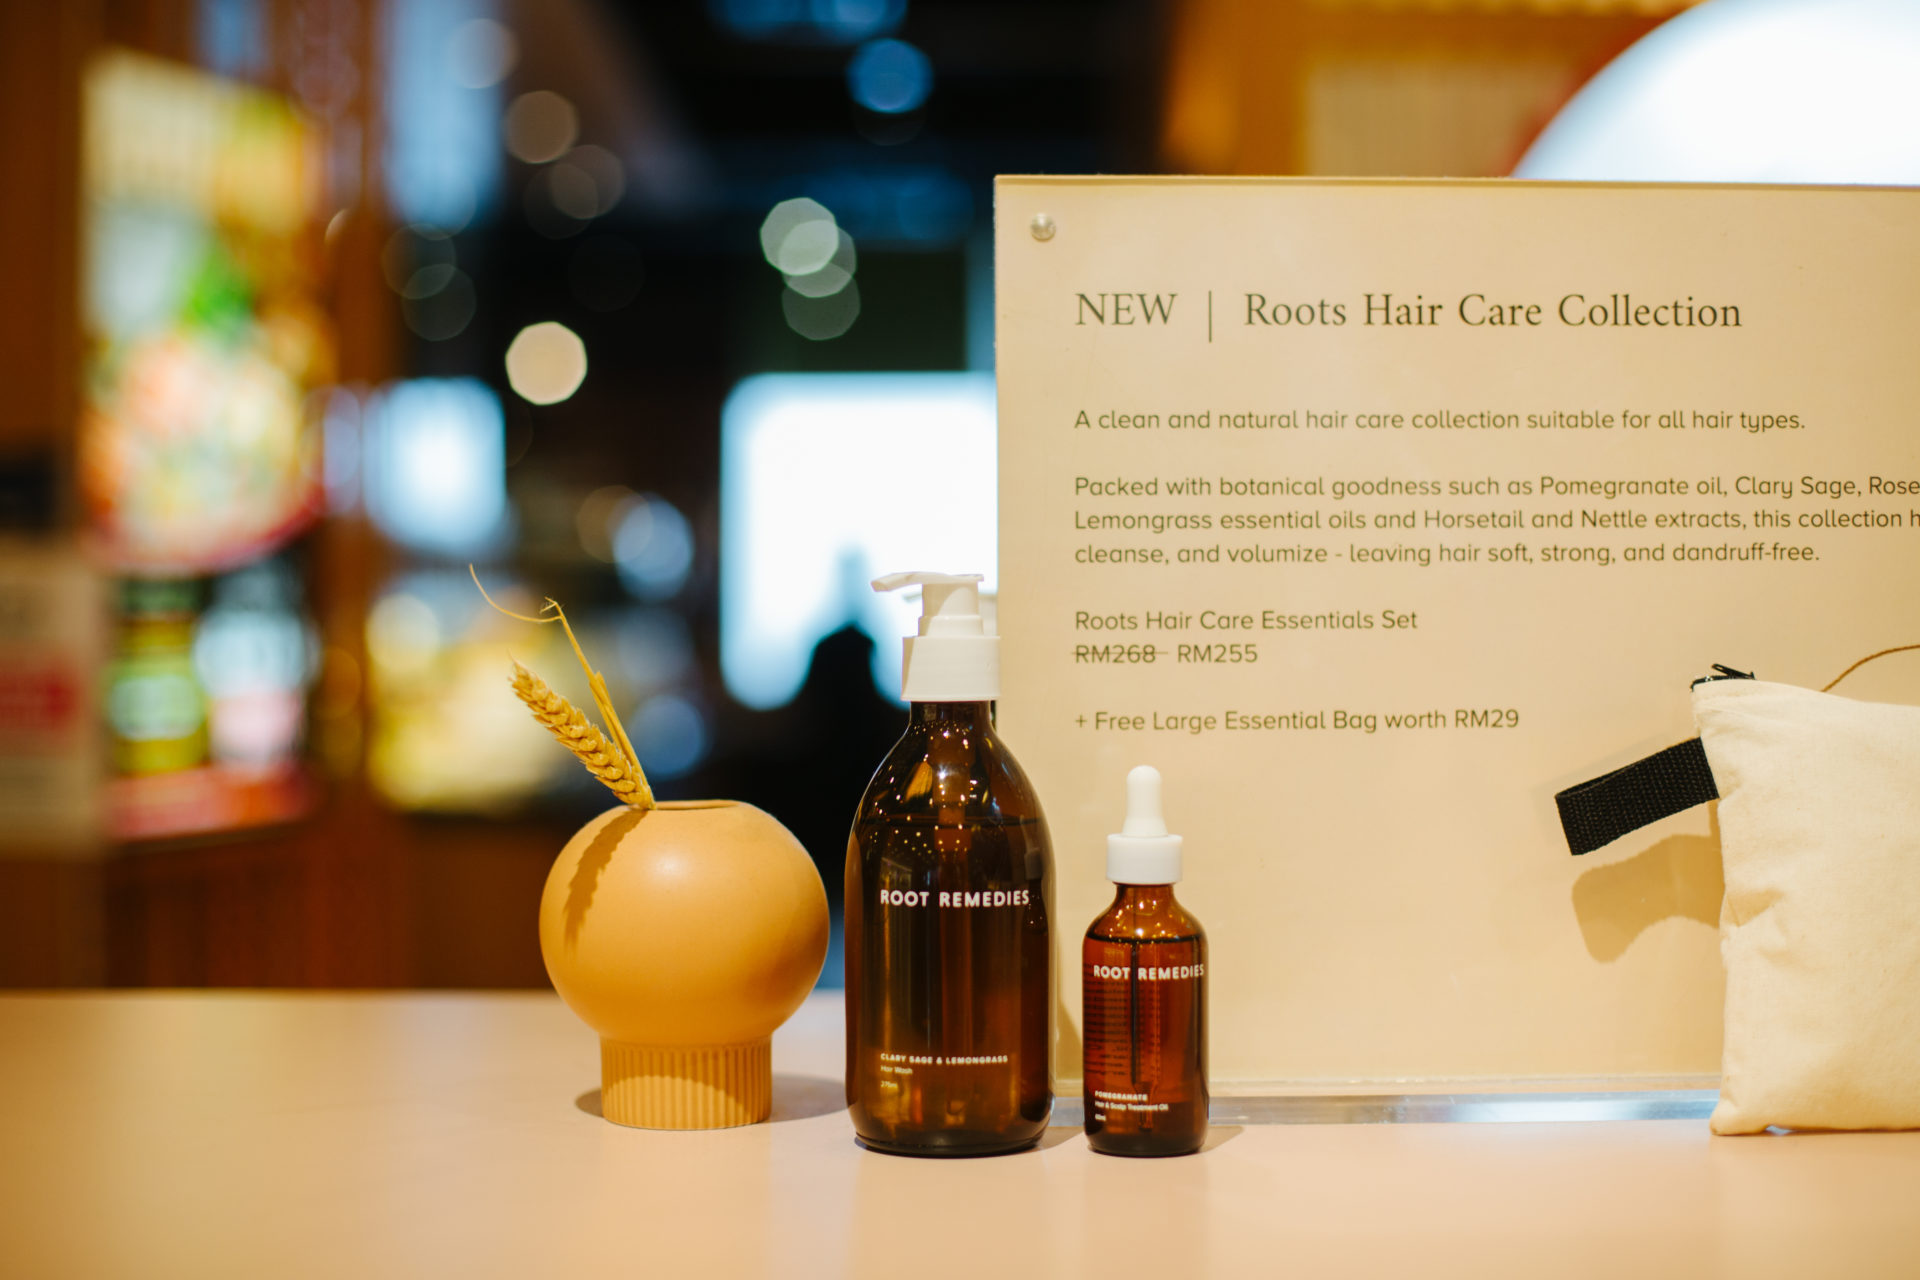 Root Remedies has since expanded to include haircare products